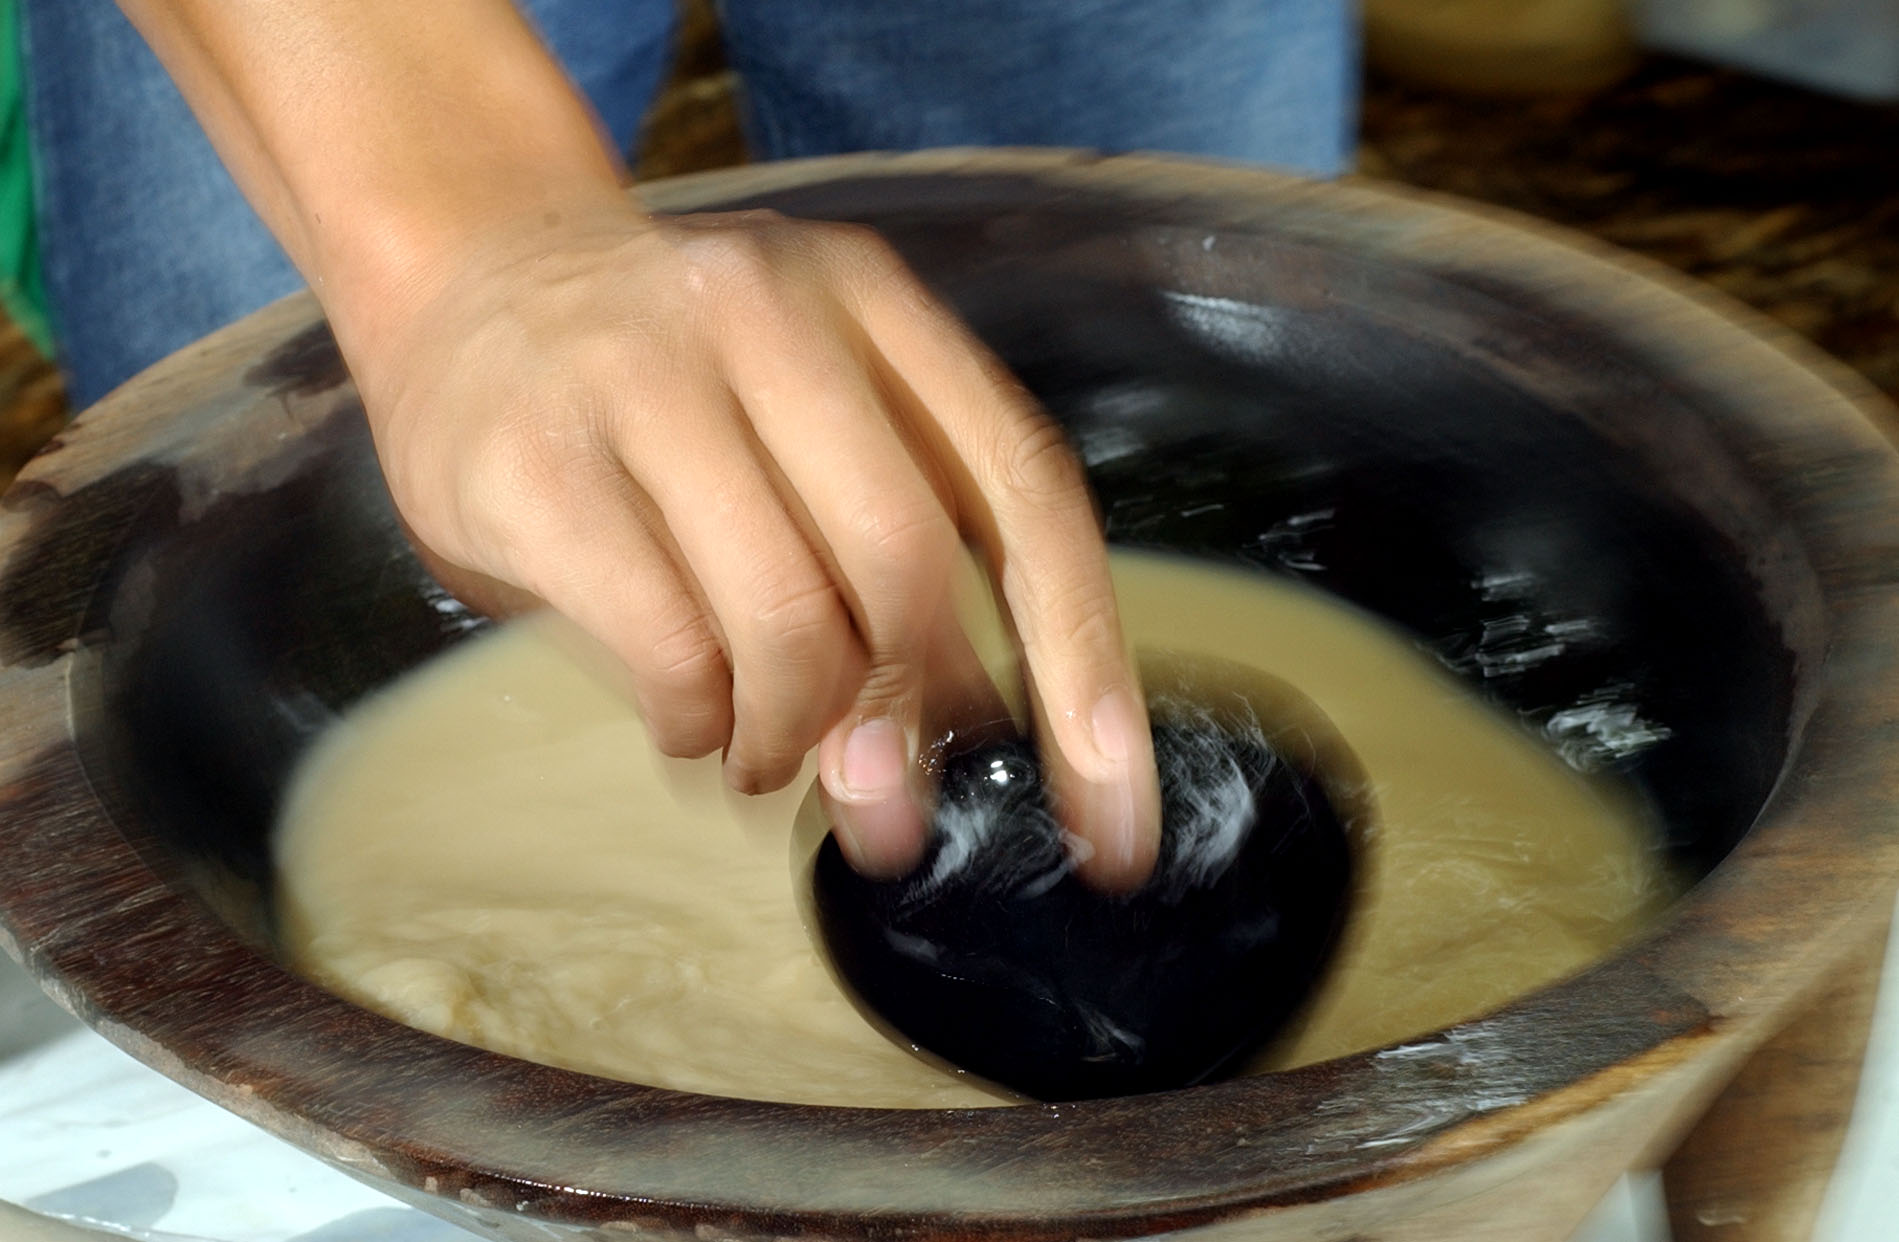 Kava is 